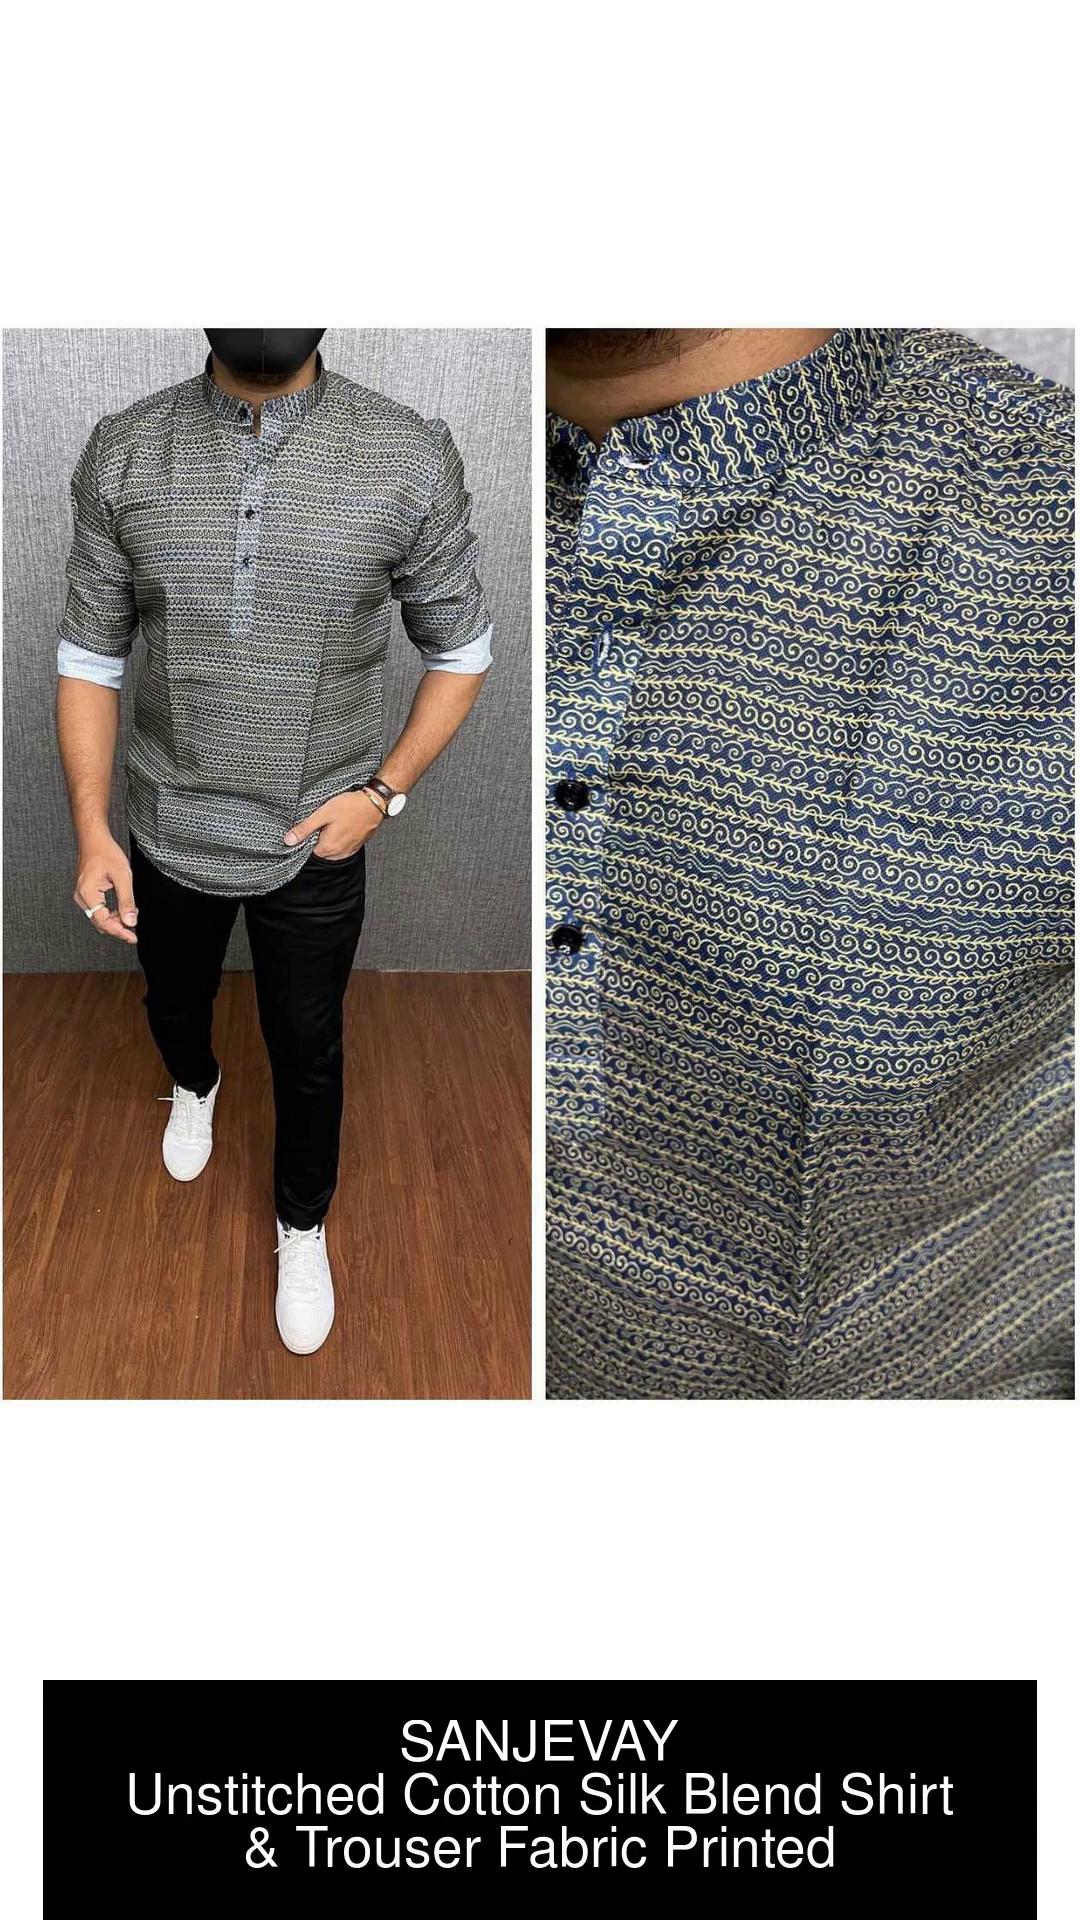 Sangam Multi Poly Blend Unstitched Shirts  Trousers  Buy Sangam Multi  Poly Blend Unstitched Shirts  Trousers Online at Low Price in India   Snapdeal